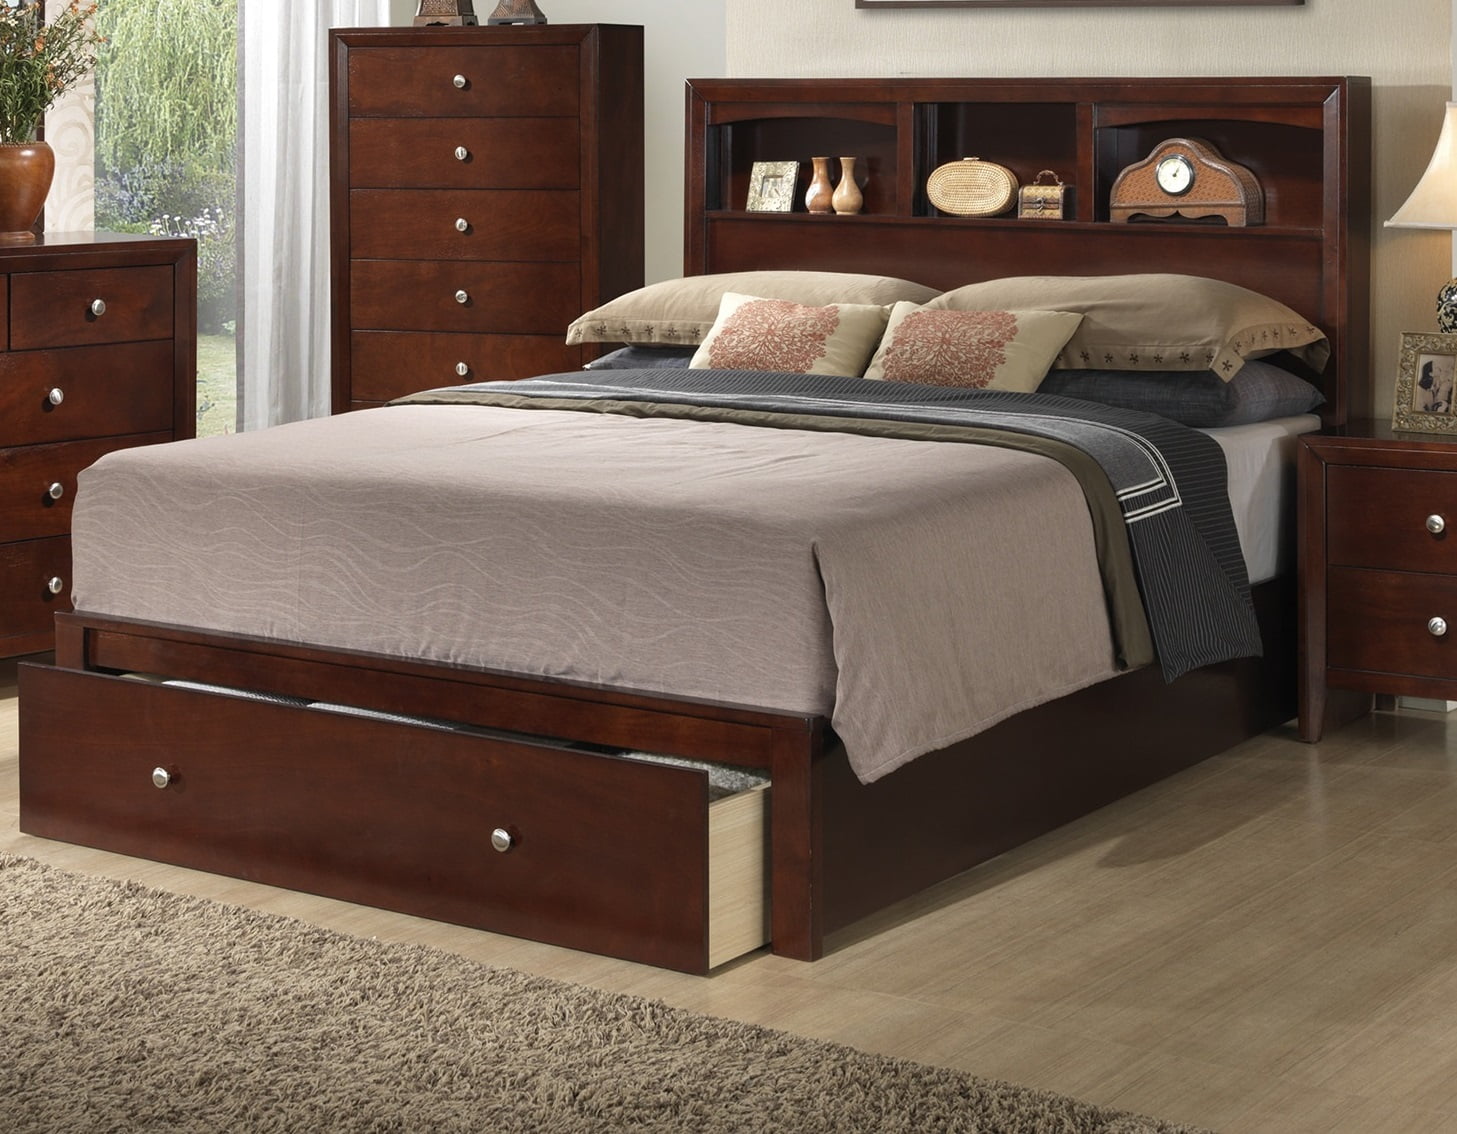 Bedroom Furniture 1pc California King, Under Bed Drawers King